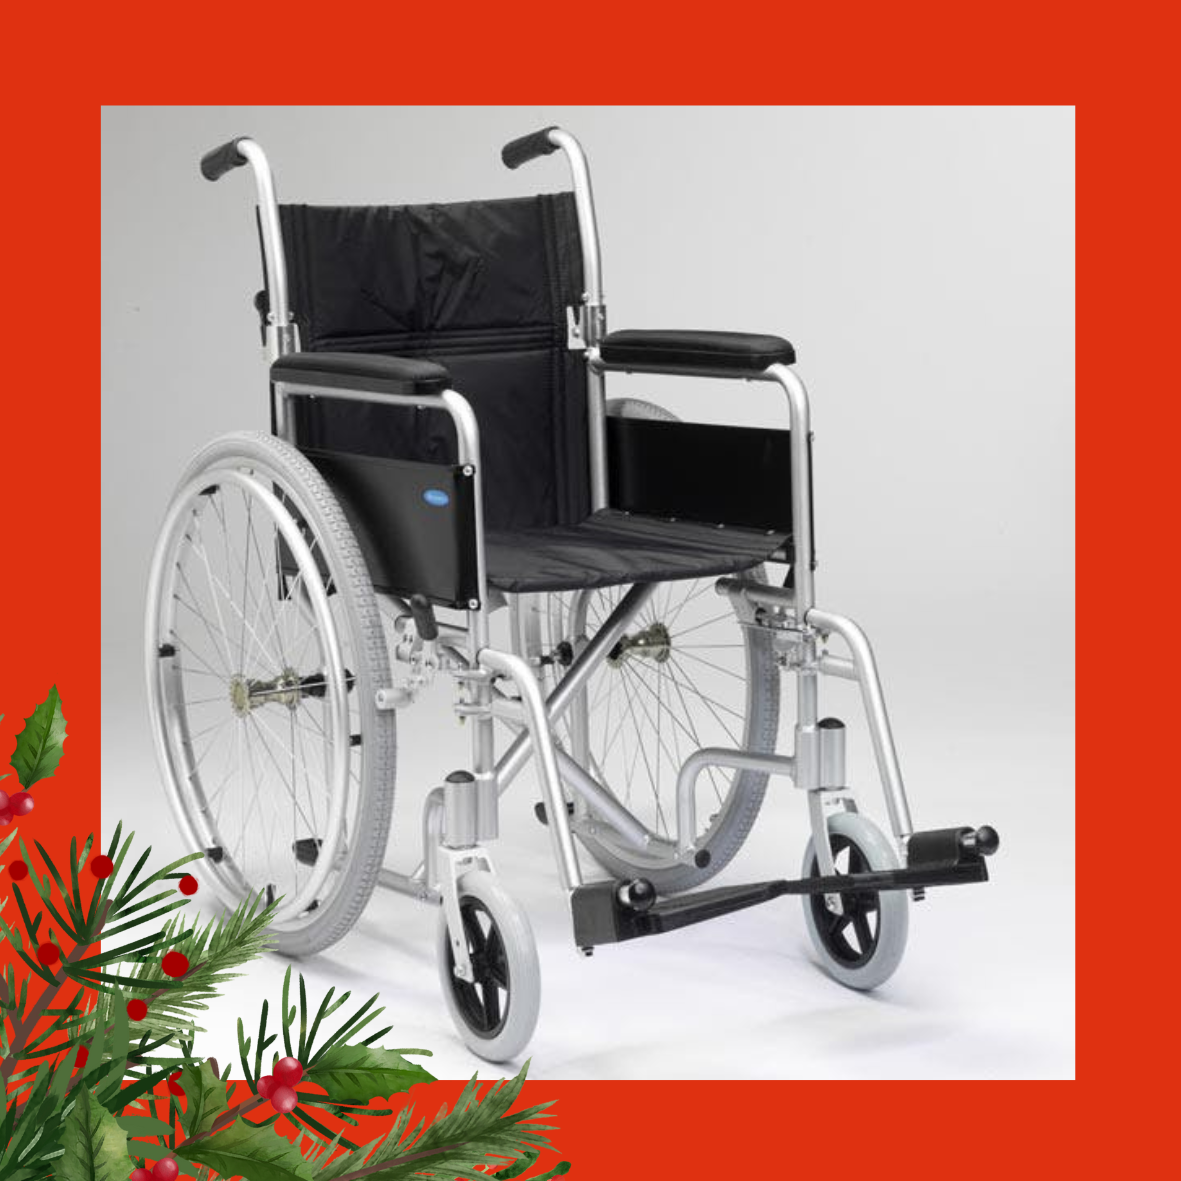 An image of a self-propelling wheelchair on a red background. There are holly and berries in the left hand corner.